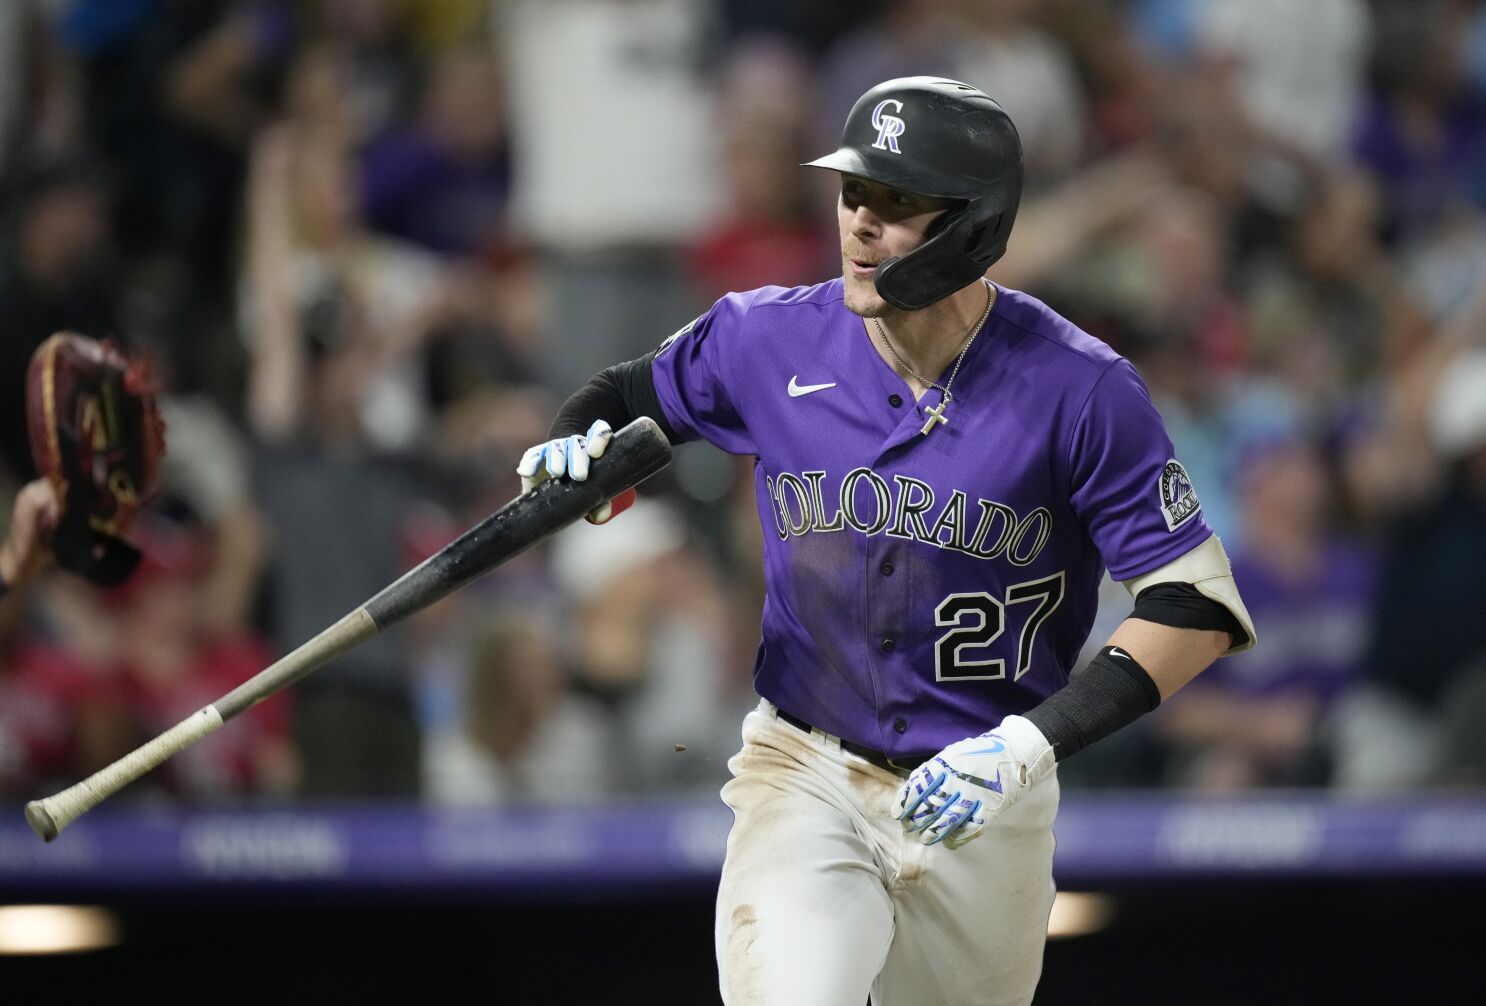 Story hits 3-run homer in 7th, Rockies hold off Cards 3-2 – Daily